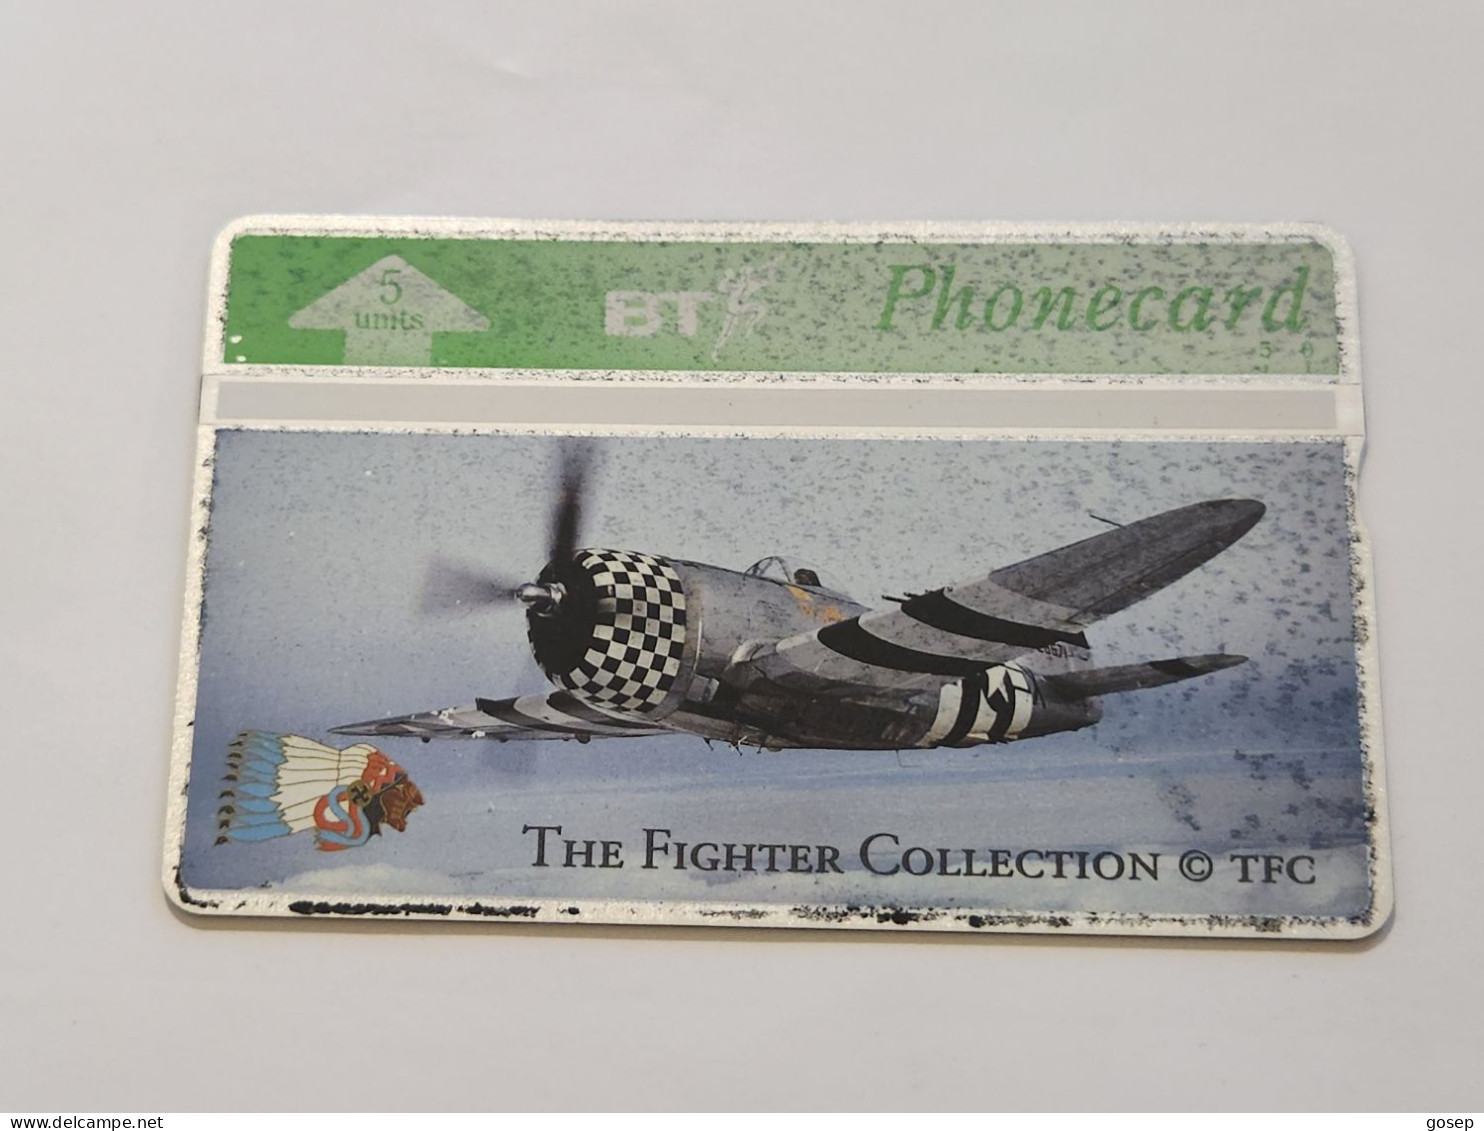 United Kingdom-(BTG-313)-Fighter Collection-(2)(SPOTS)-(285)(5units)(465D12352)(tirage-900)price Cataloge-10.00£-mint - BT General Issues